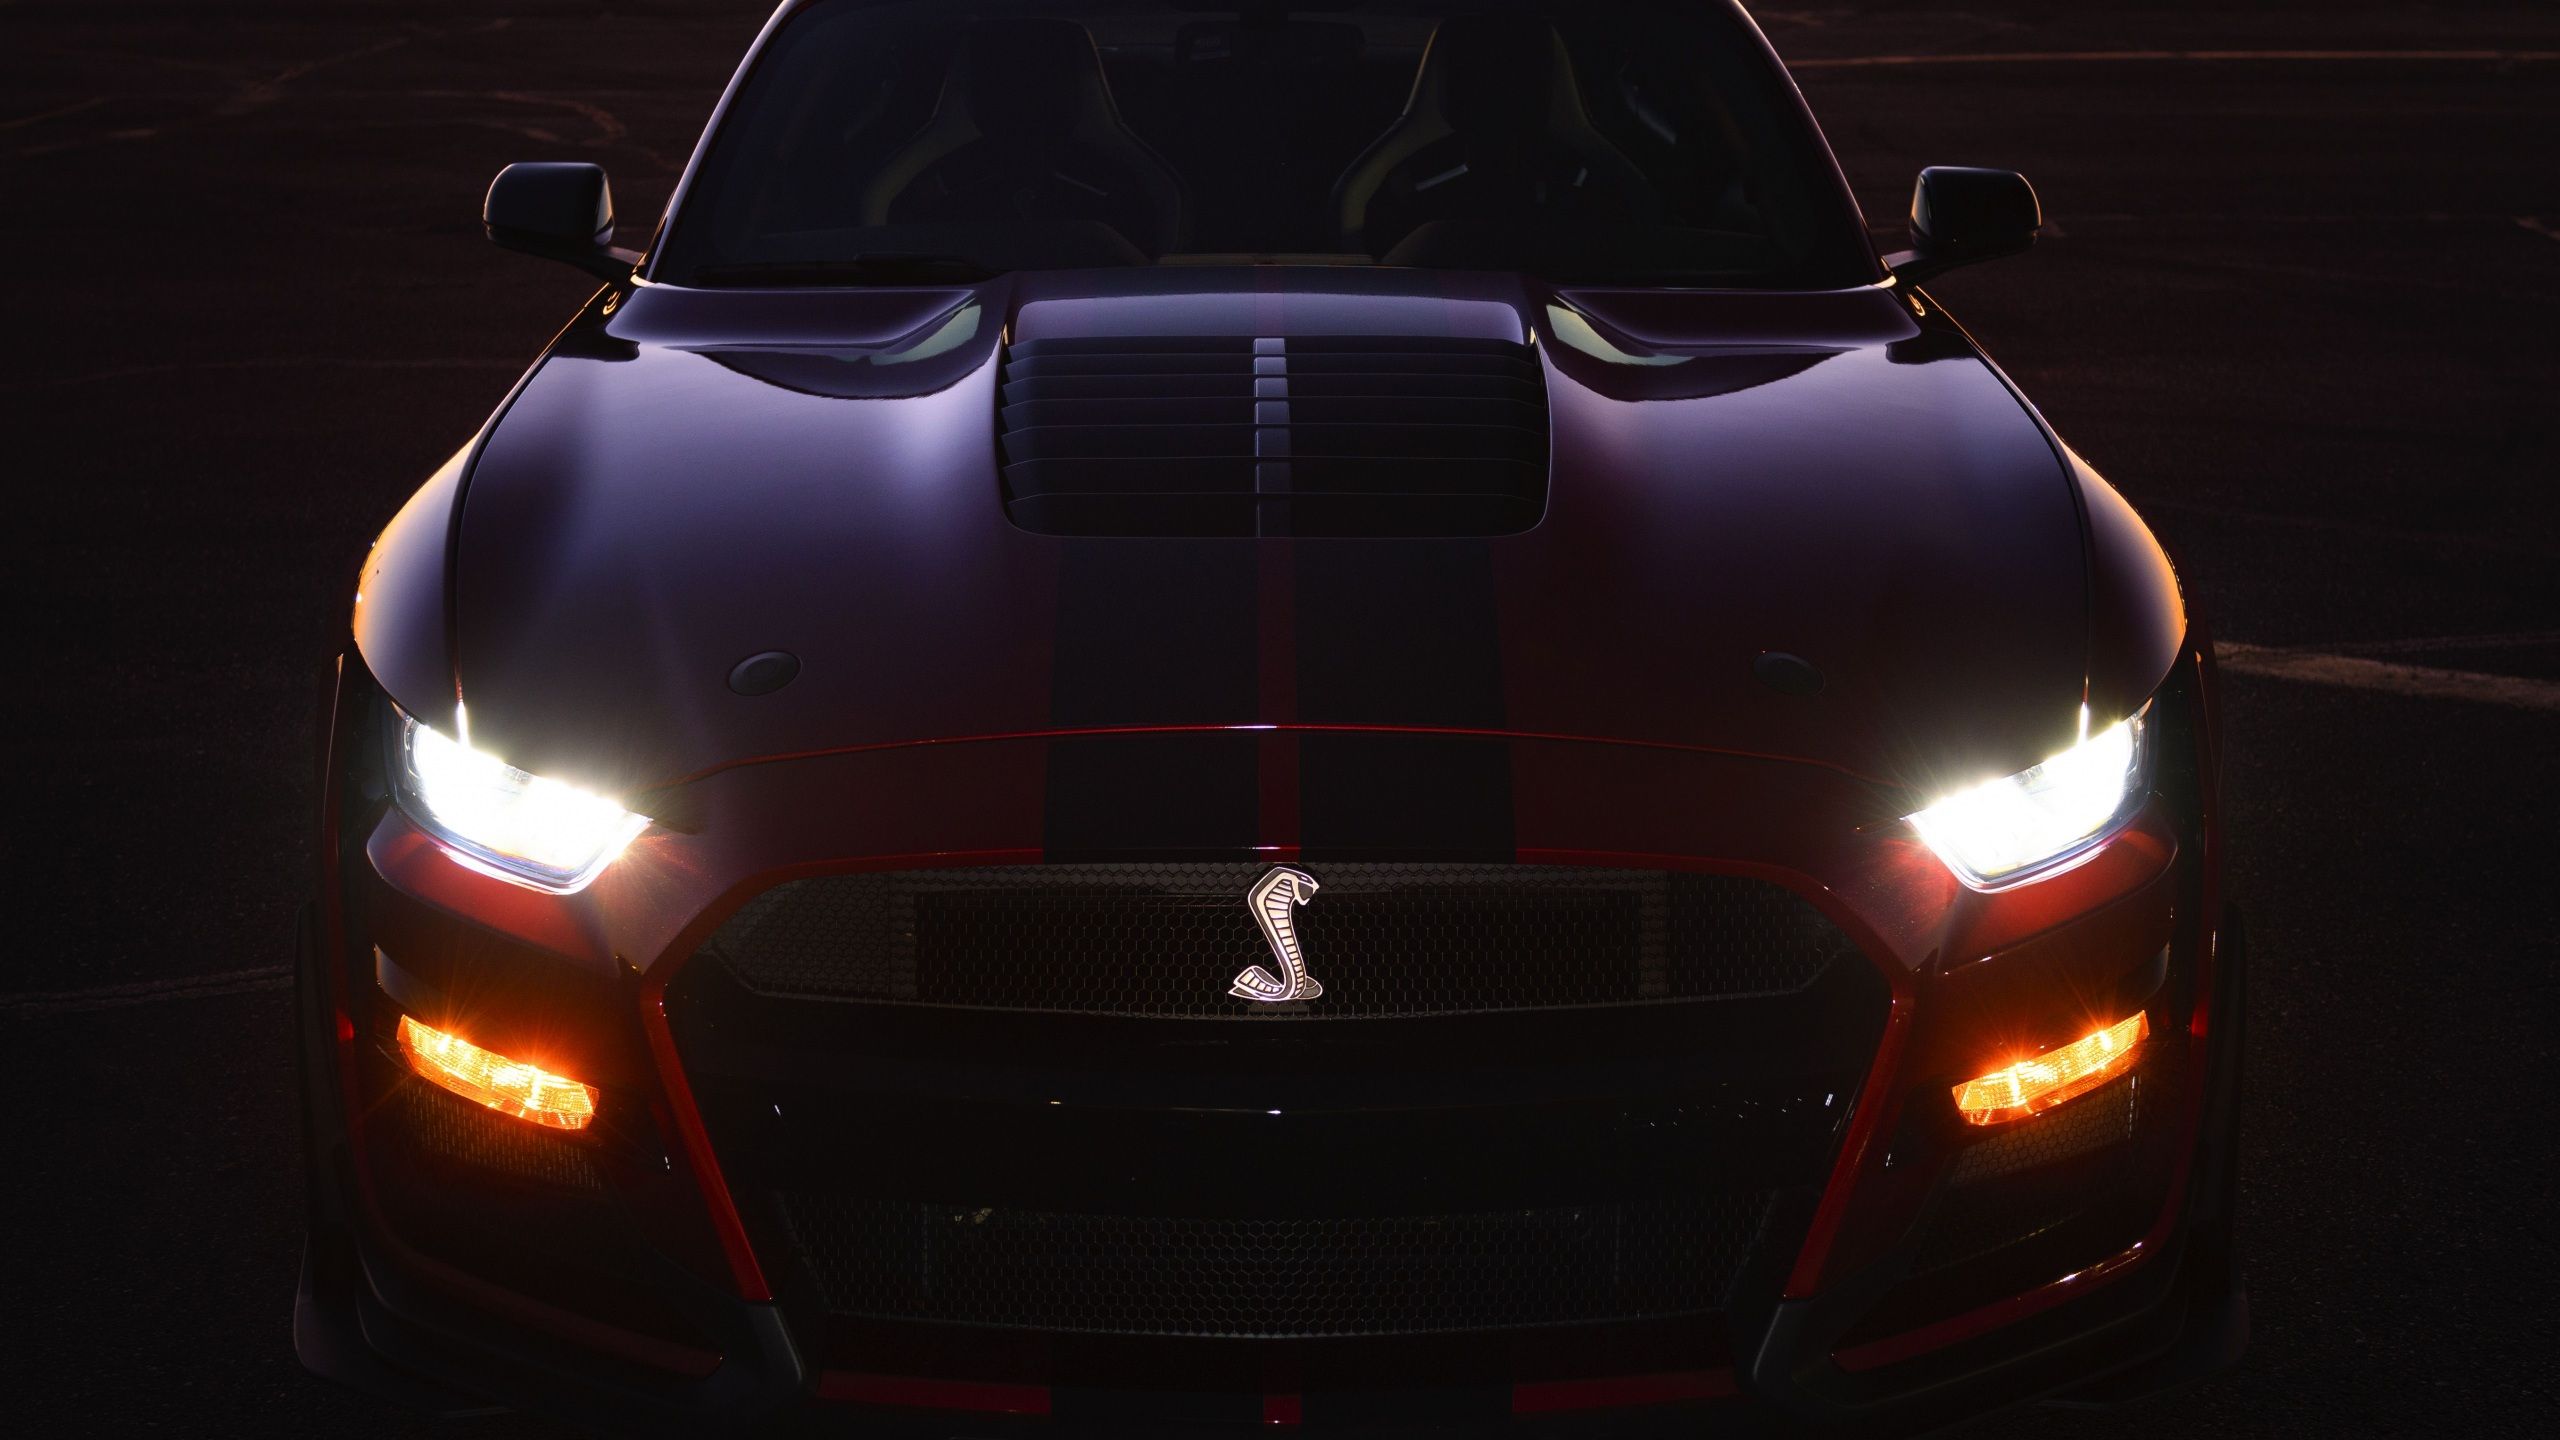 Wallpaper 4k Ford Mustang Shelby GT500 4k Ford Mustang Shelby GT500 4k wallpaper